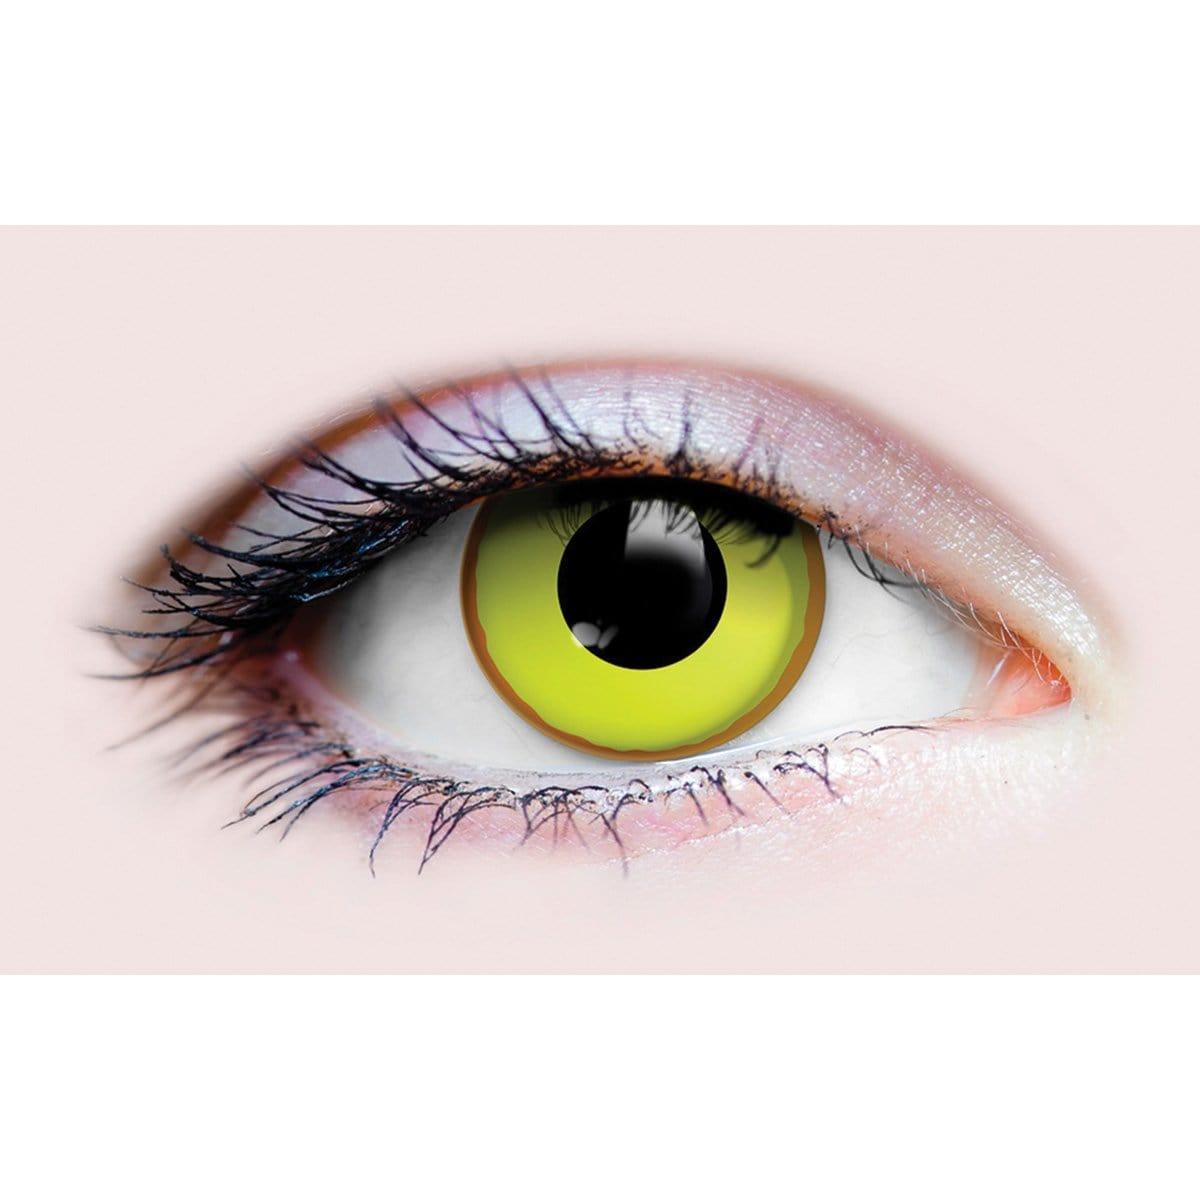 Buy Costume Accessories Nightcrawler contact lenses, 3 months usage sold at Party Expert